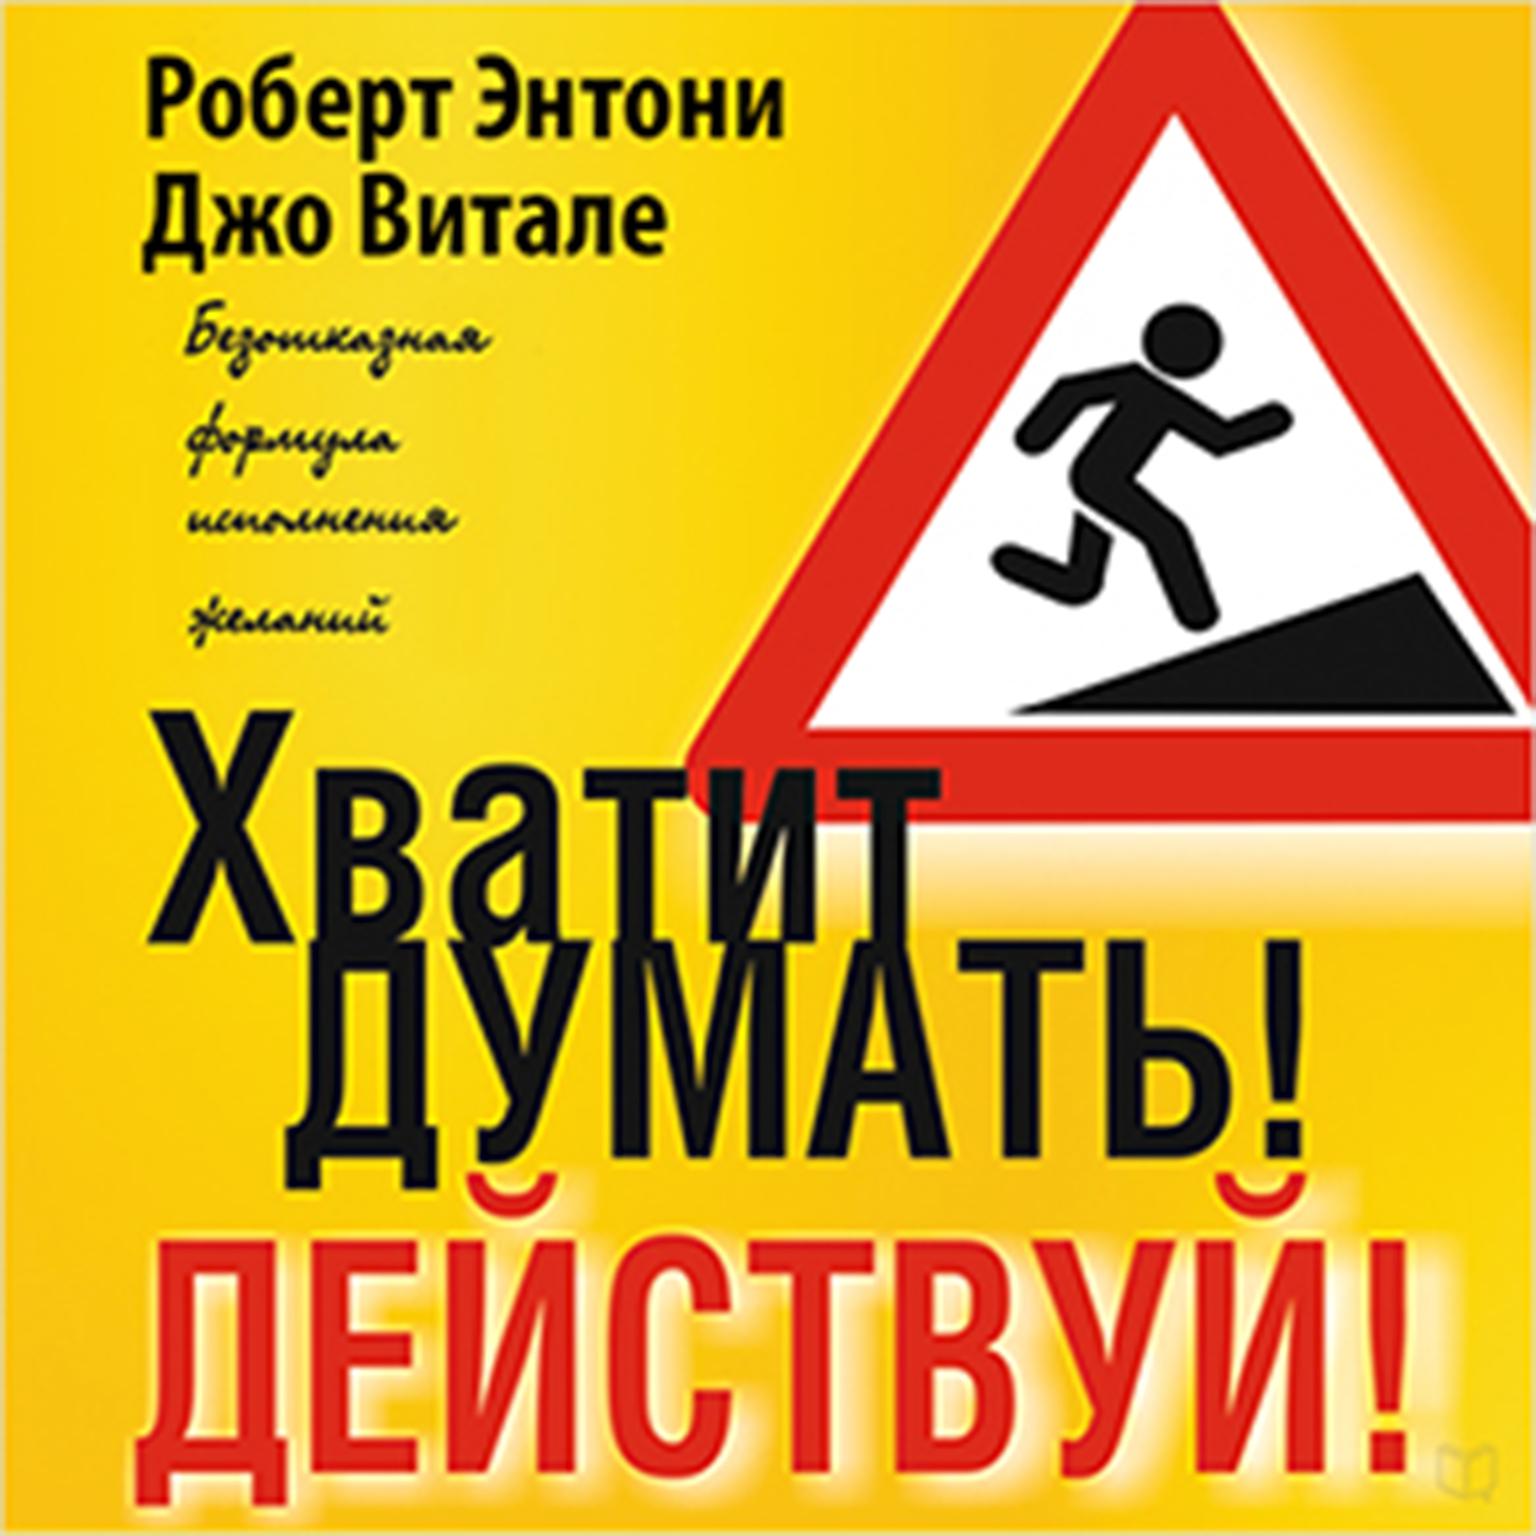 Beyond Positive Thinking [Russian Edition]: A No-Nonsense Formula for Getting the Results You Want Audiobook, by Robert Anthony  